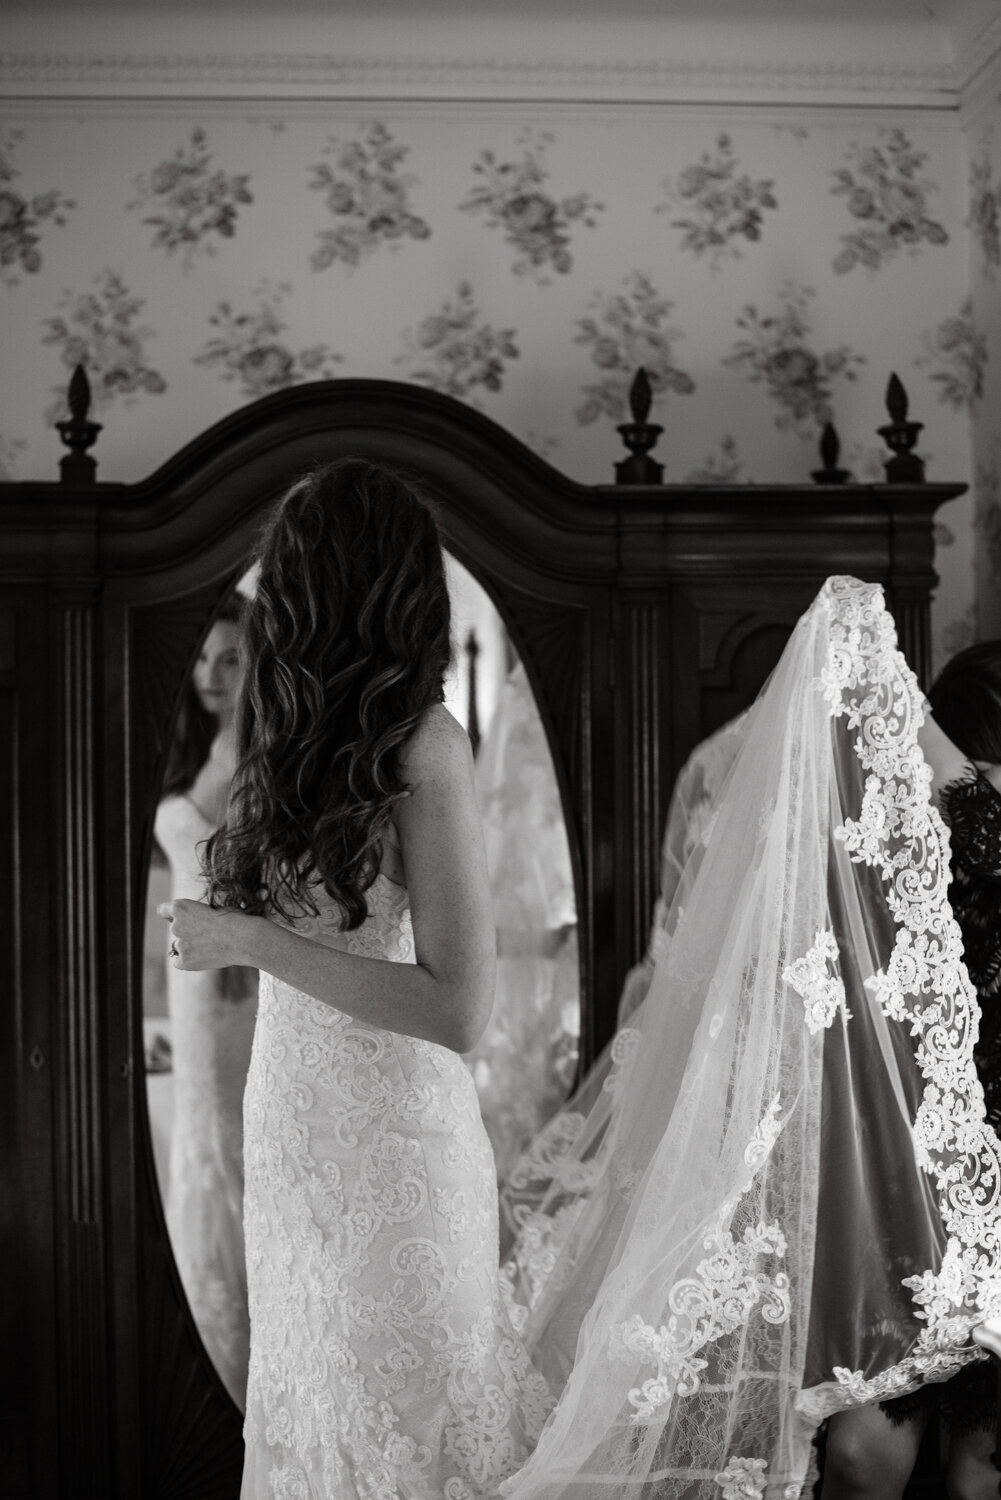 Black and white portrait of a bride getting ready, wearing a lace veil